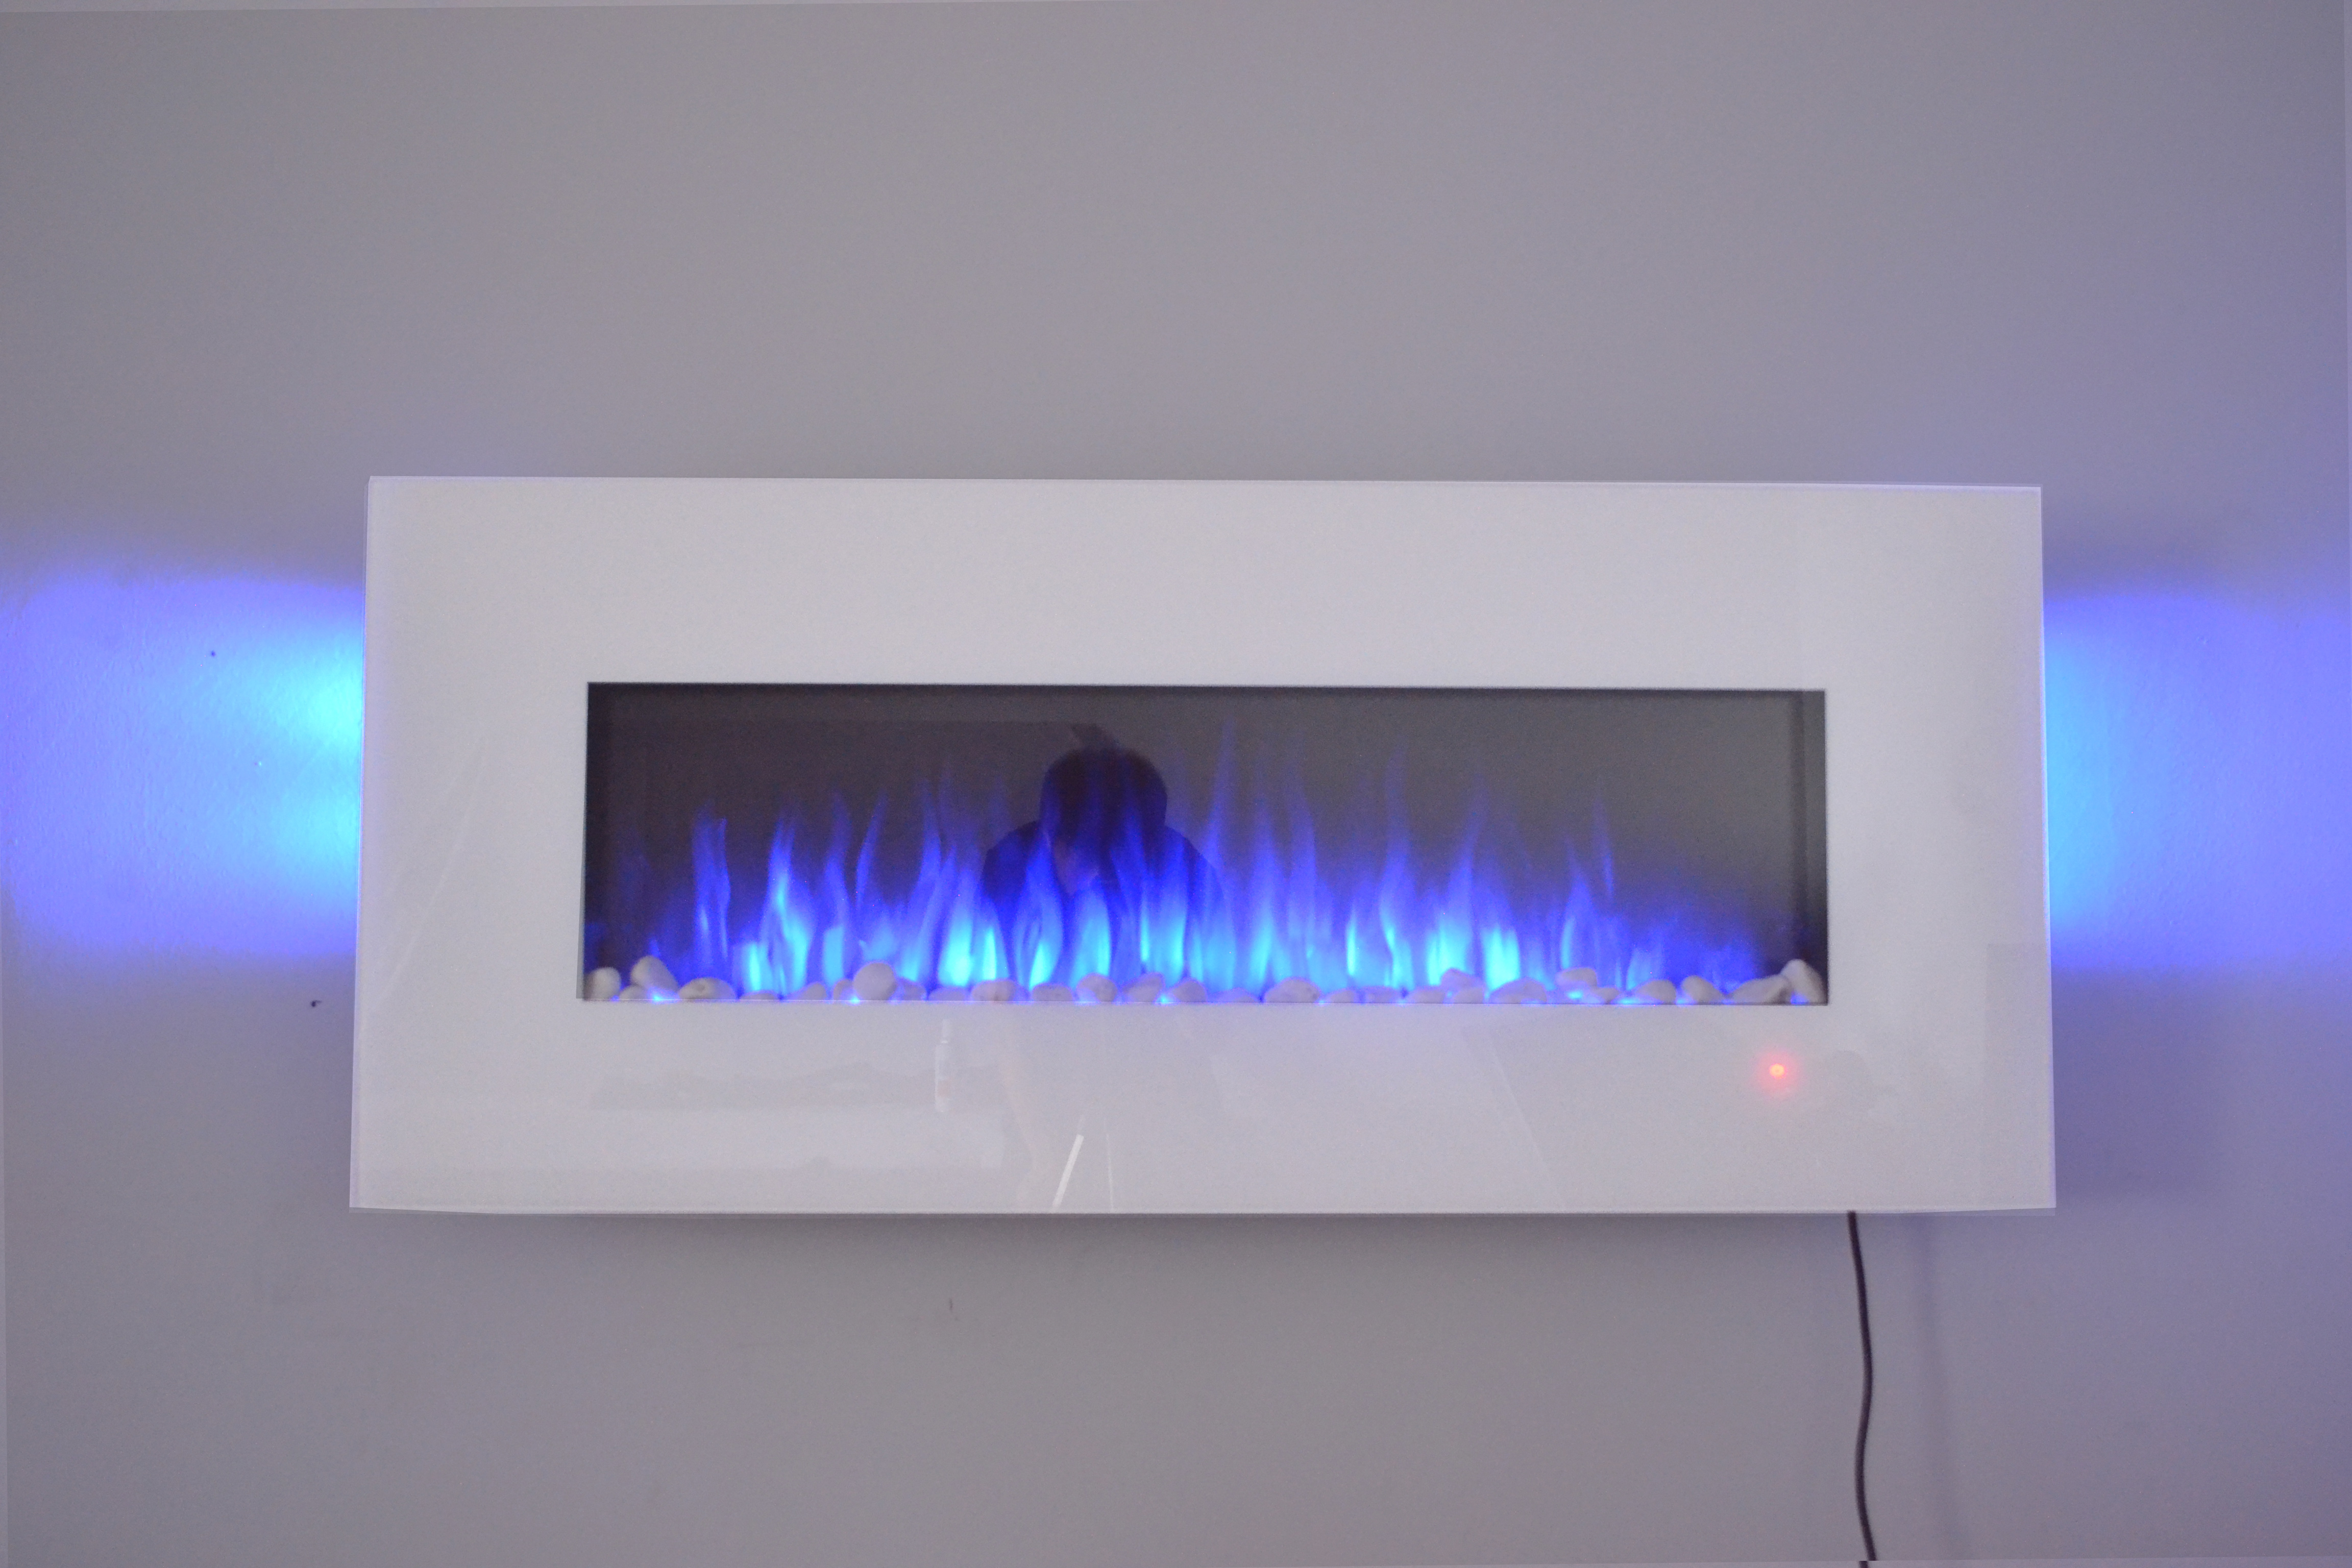 50 inch truflame wall mounted electric fire with blue flames and side LEDs